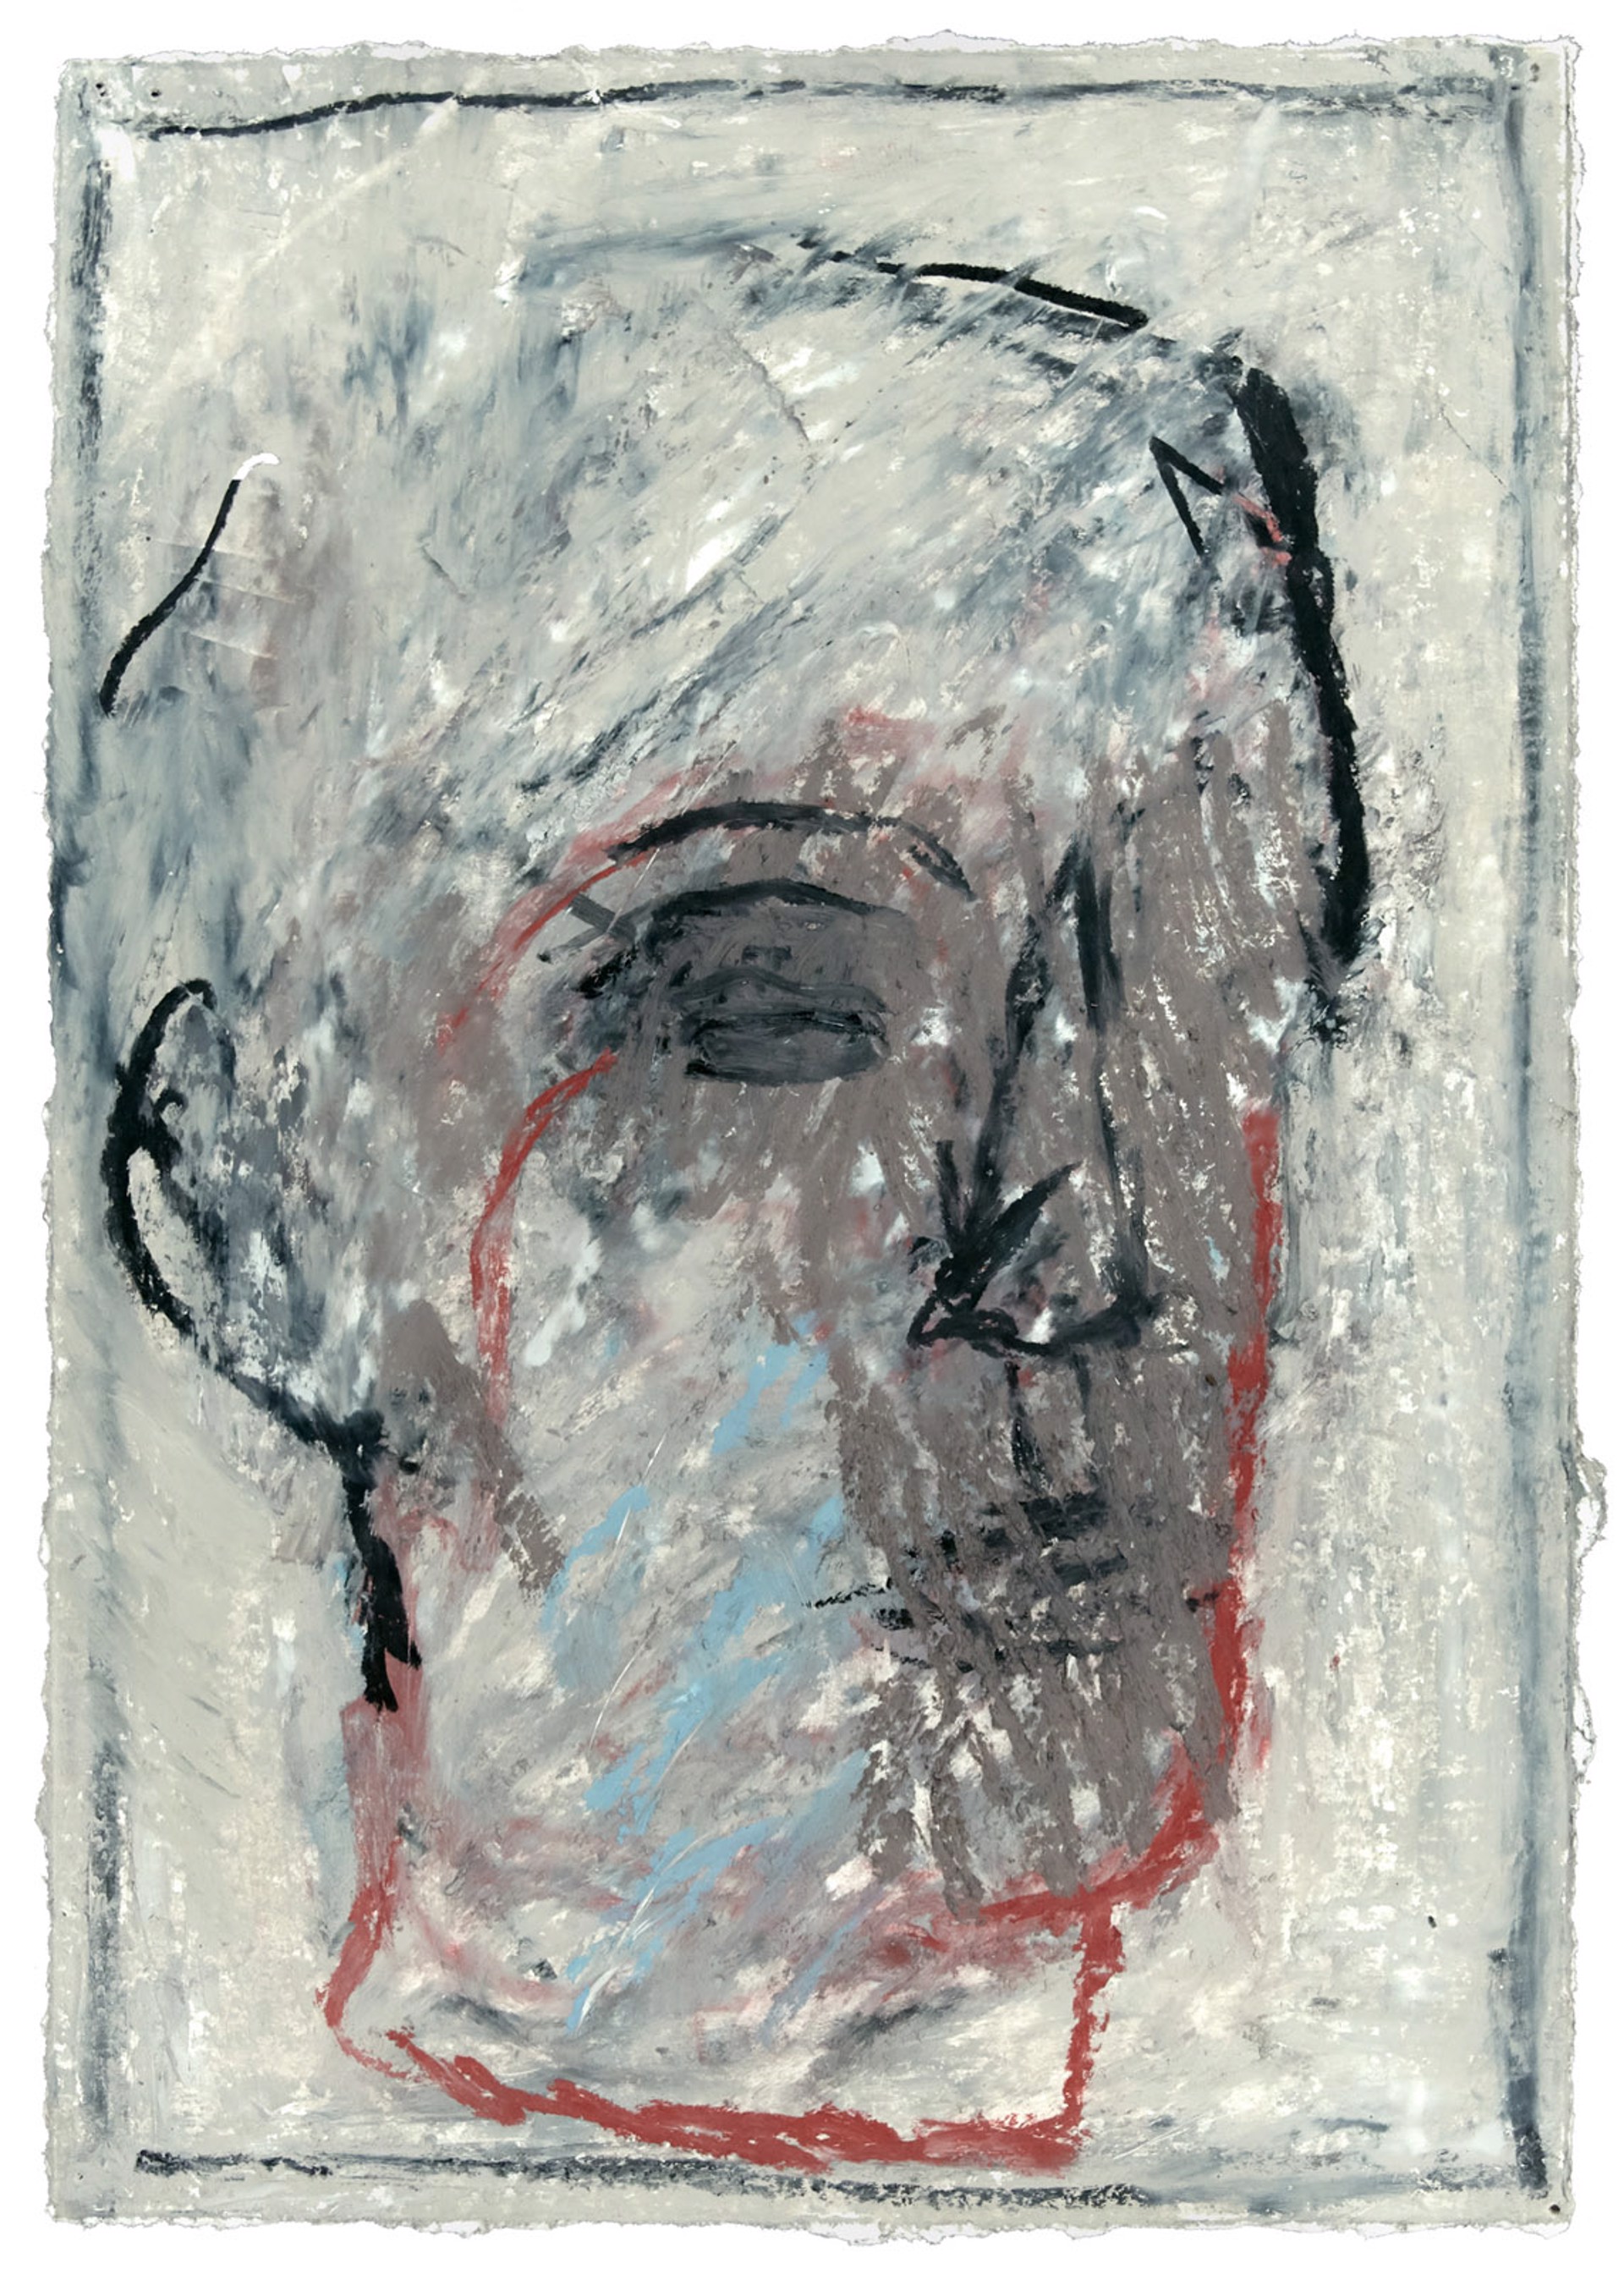 Drawings from Mt Gretna: Head #2 by Thaddeus Radell